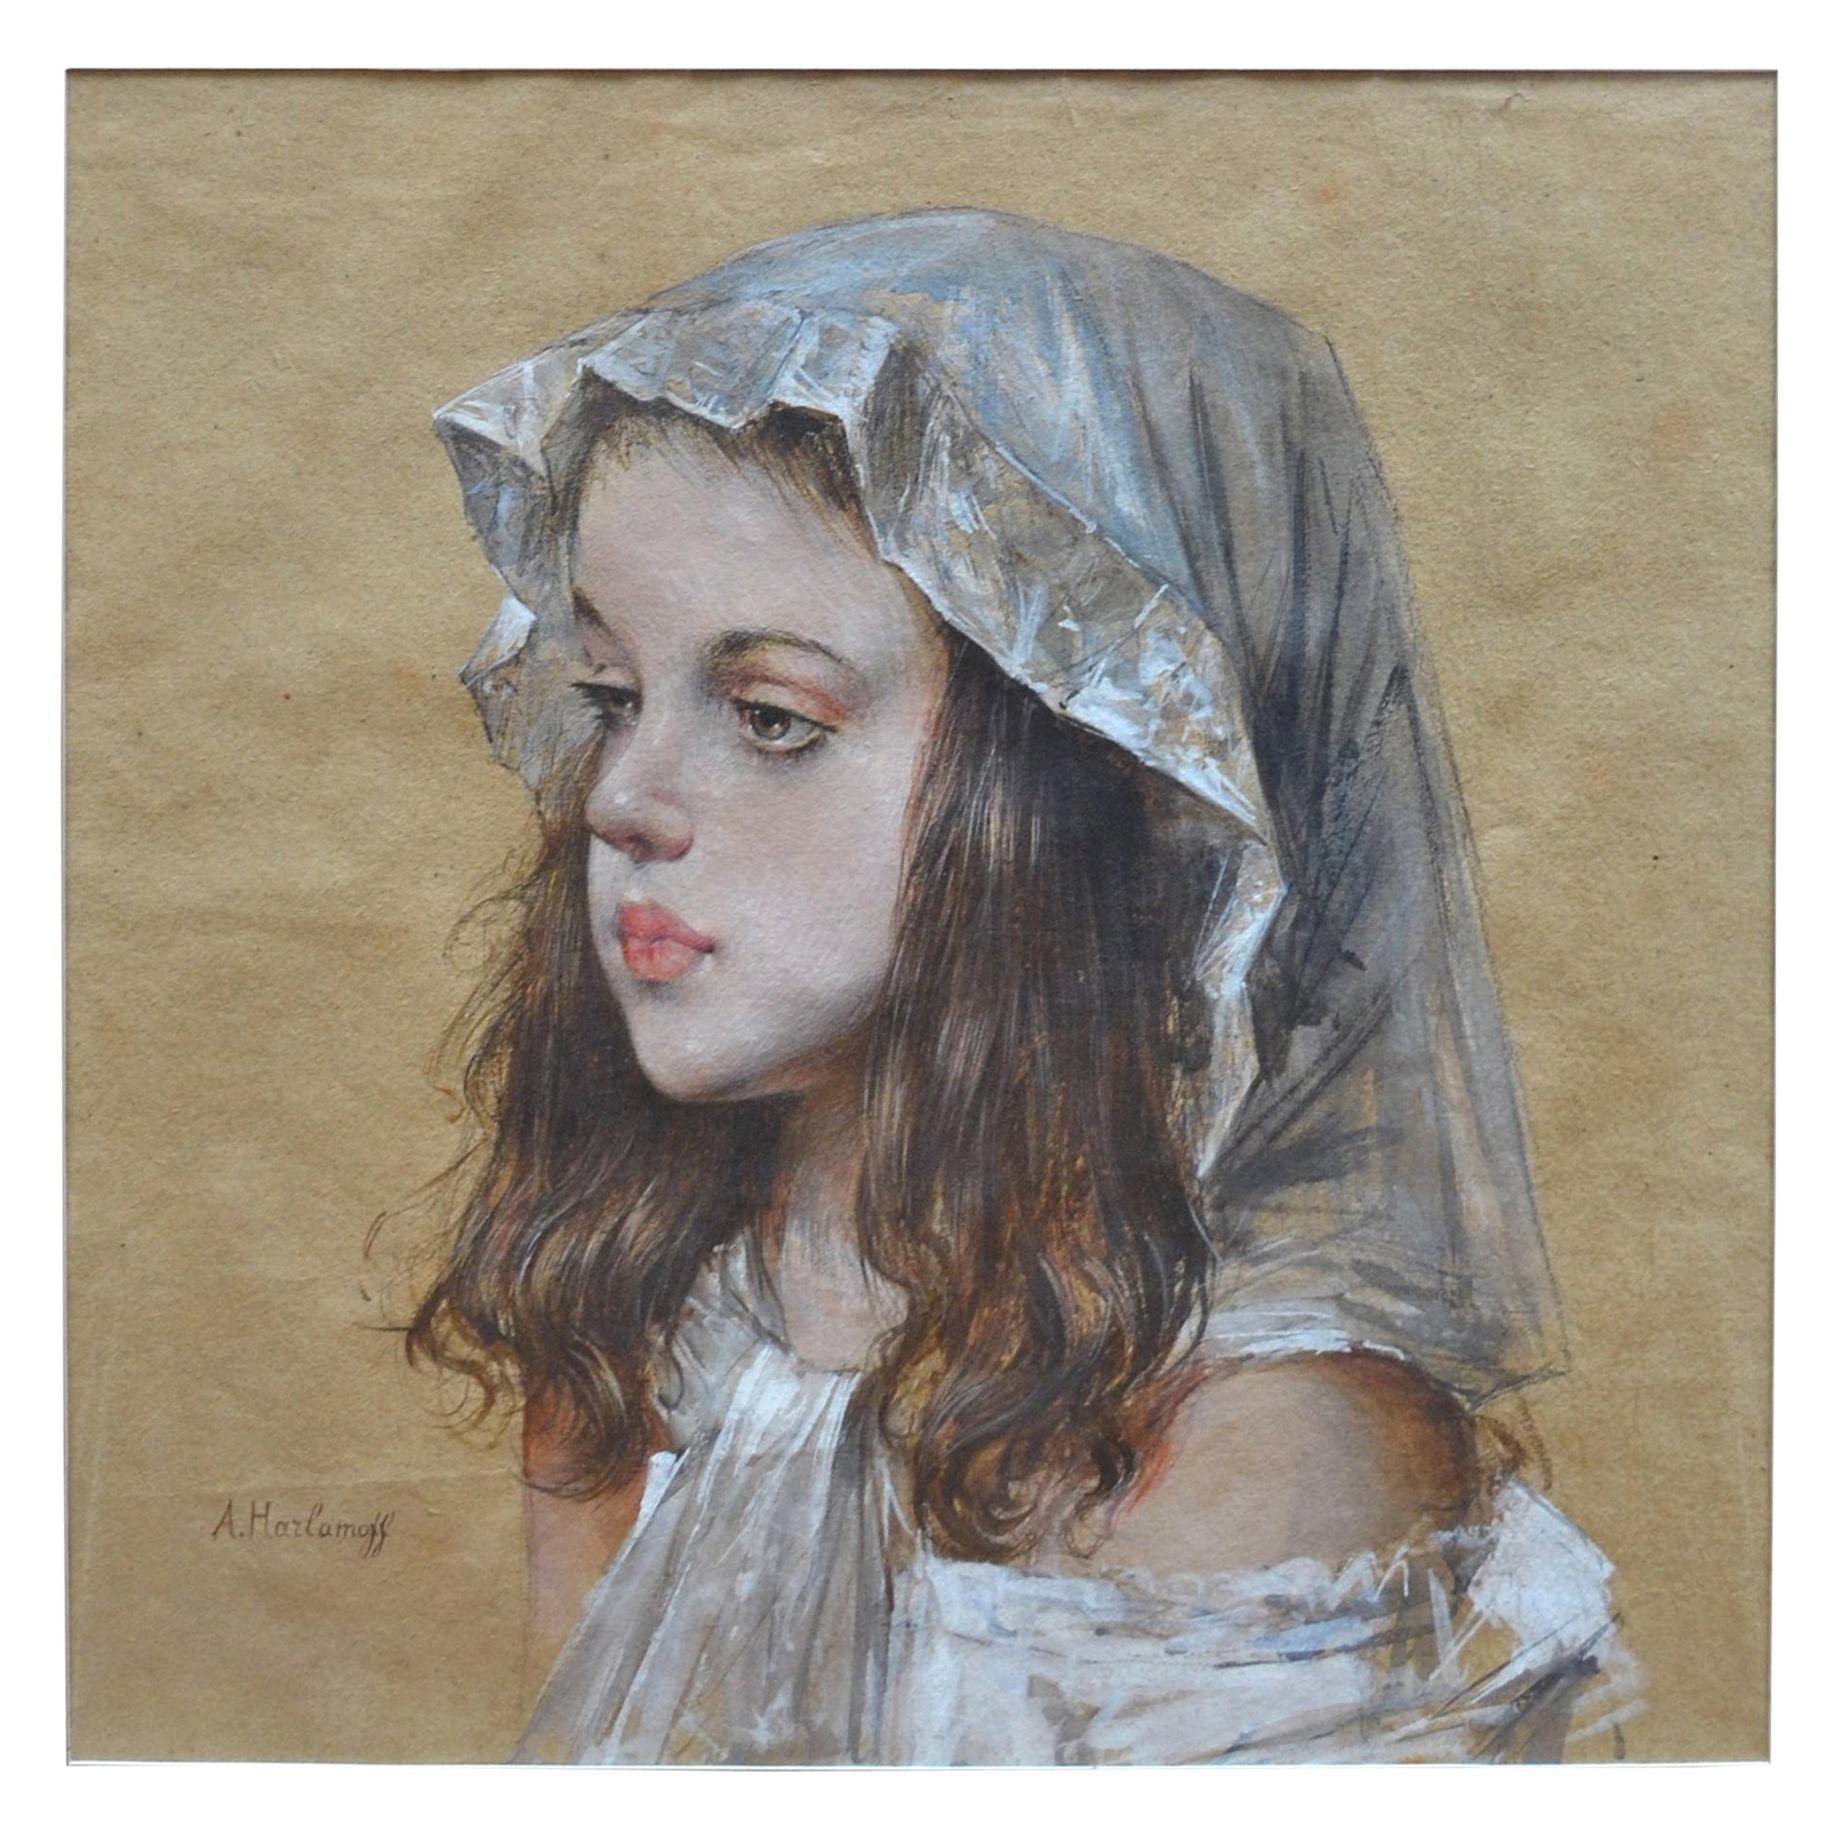 Portrait of a young Russian or French girl executed in charcoal and gouache on paper. Harlamoff was most renowned for his masterful portraits of young girls of which this is a fine example, chosen for their charming and innocent beauty.
Signed